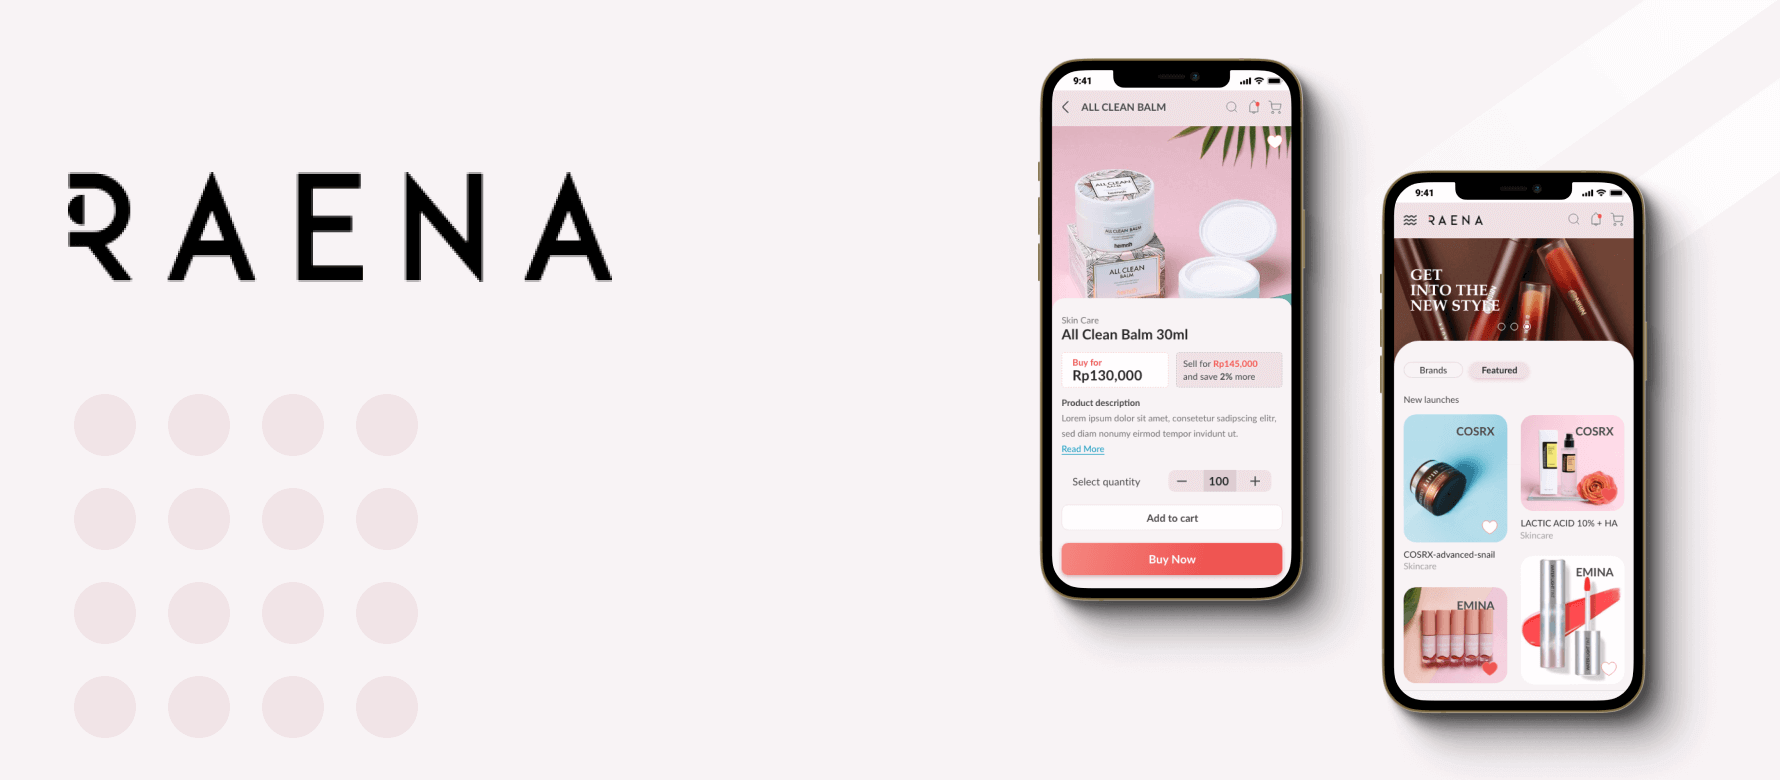 Case Study | App screen design of Raena, B2B2C beauty product reseller and dropship E-commerce platform in Indonesia